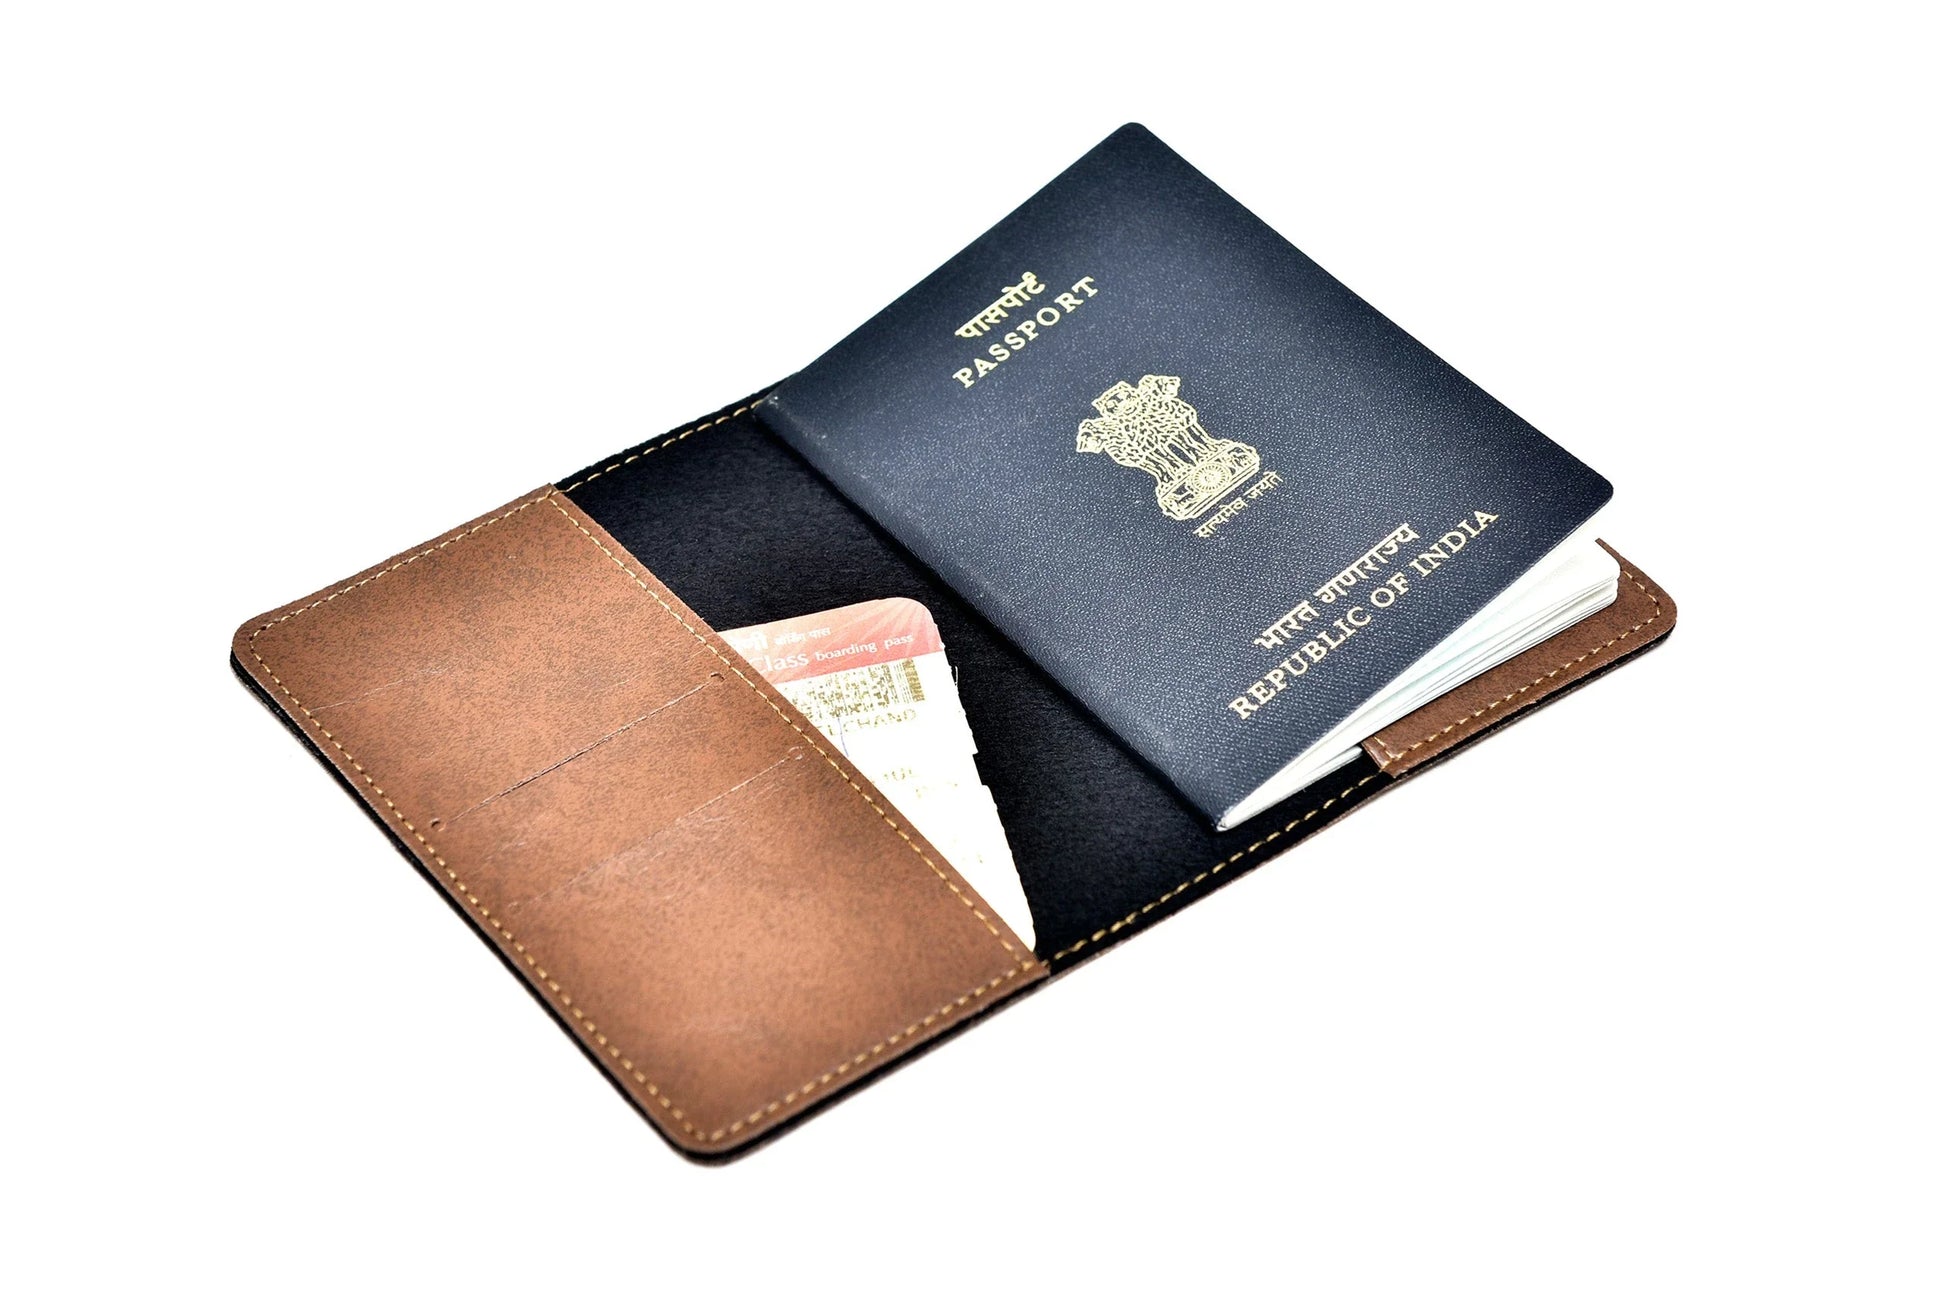 Inside or open view of brown passport cover